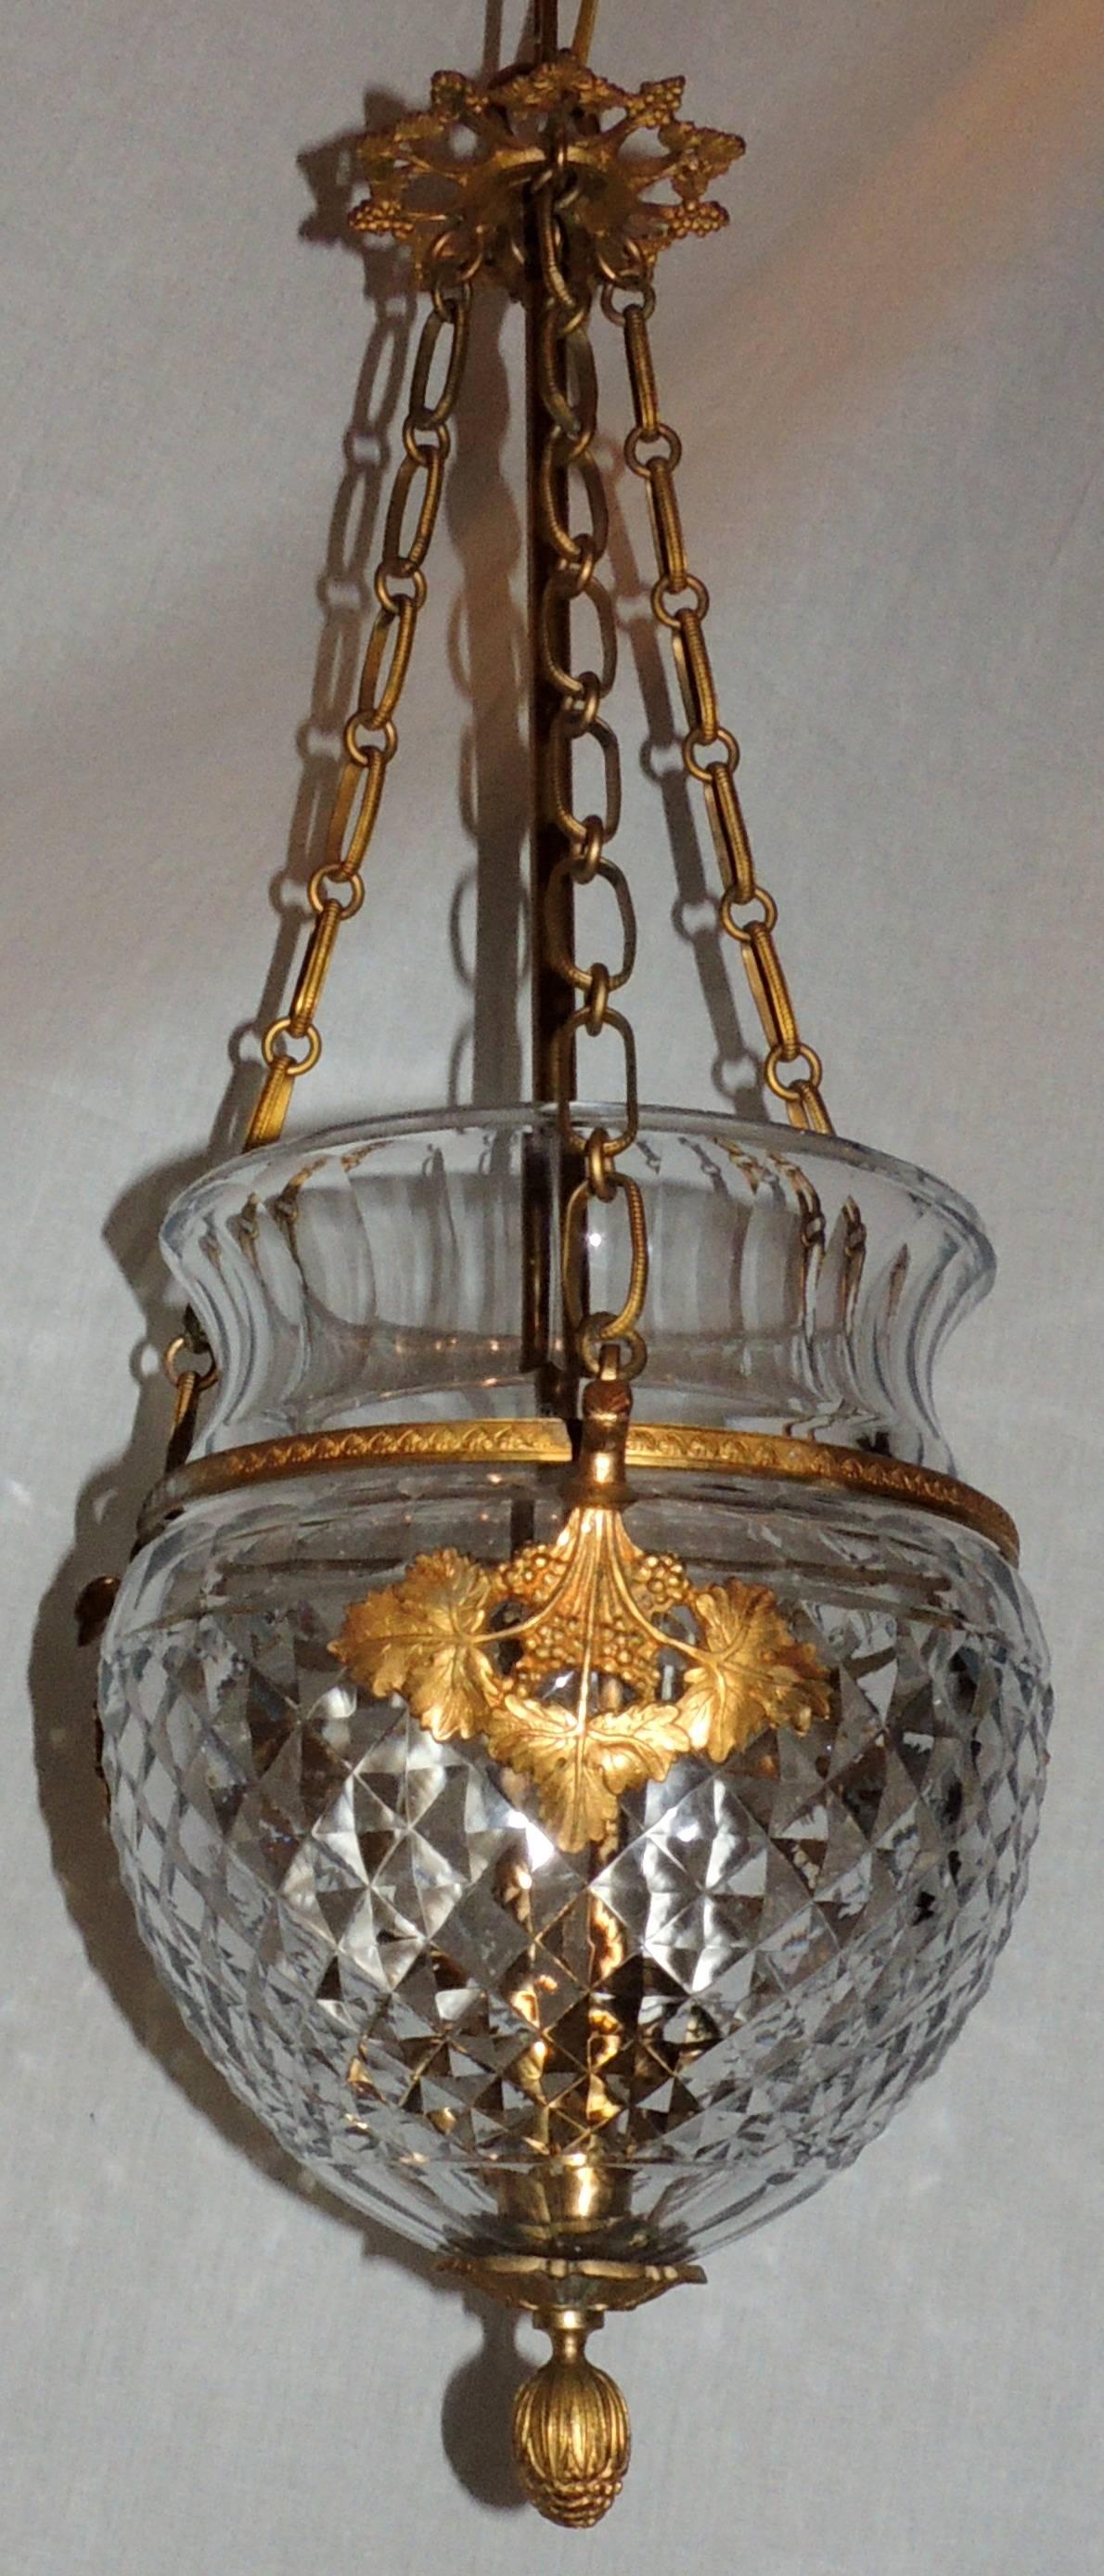 A wonderful French bronze and diamond cut crystal neoclassical or Empire ormolu-mounted Lantern chandelier with three candelabra lights. In the manner of Baccarat.
Measures: 21